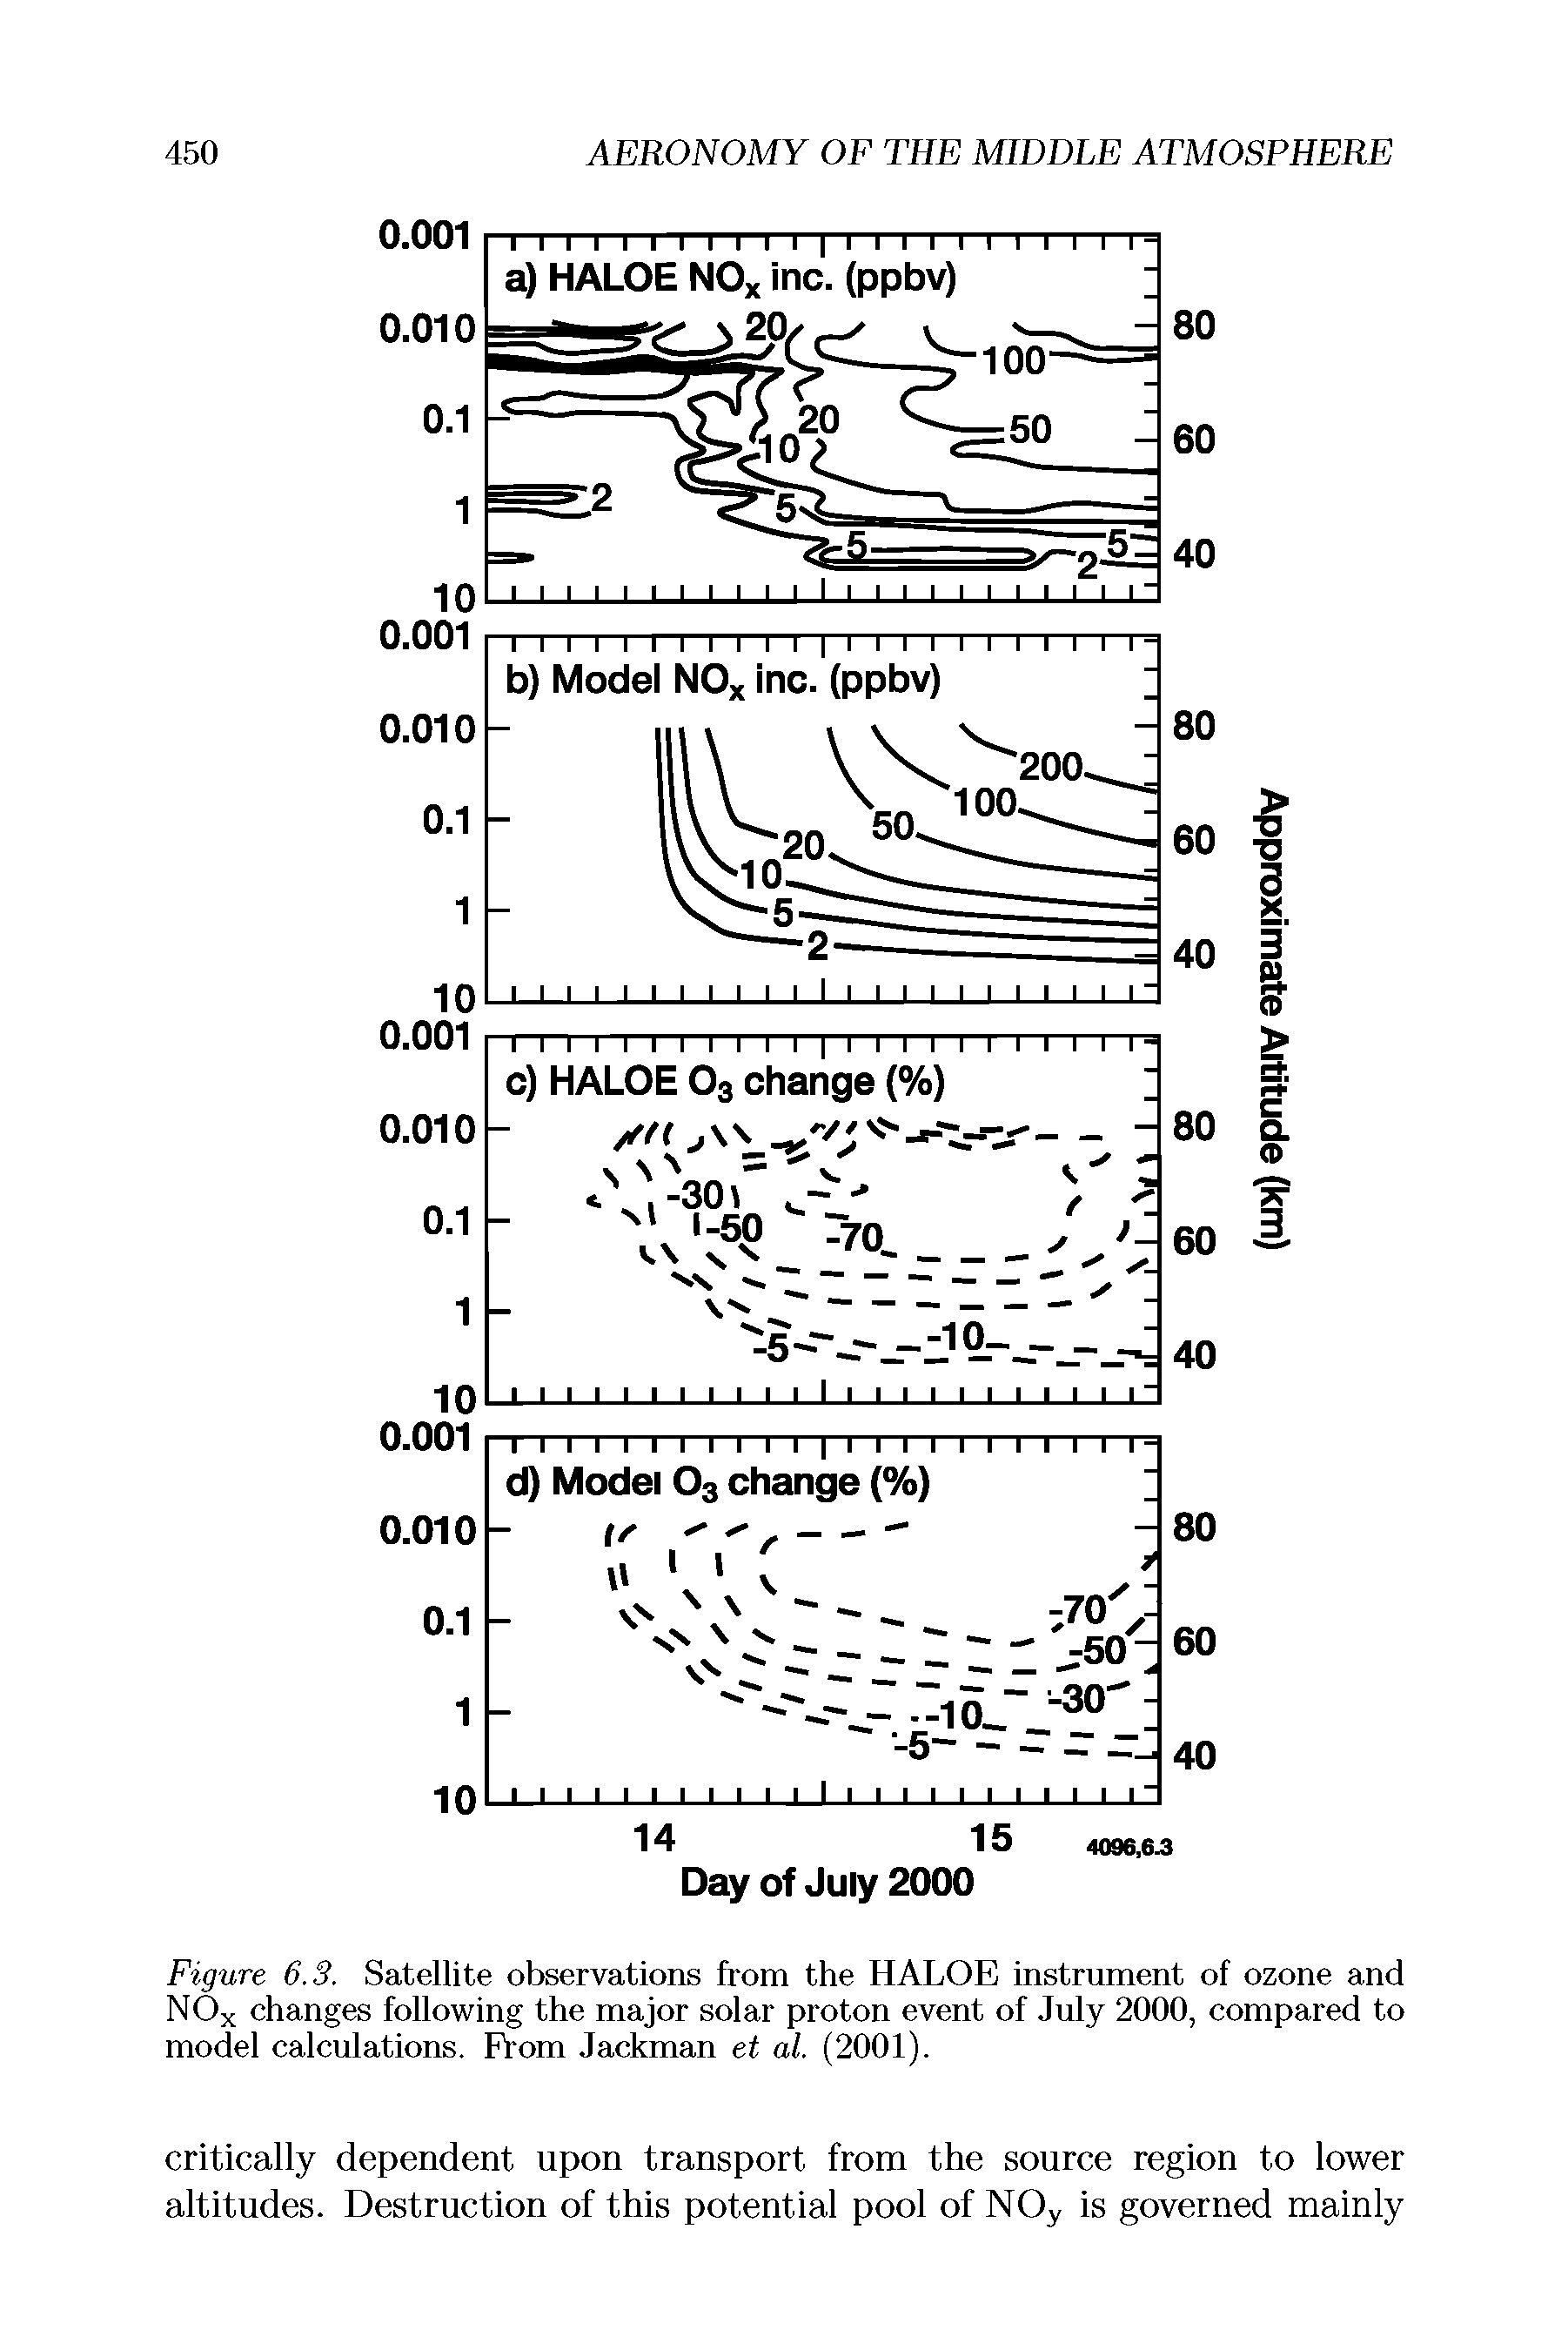 Figure 6.3. Satellite observations from the HALOE instrument of ozone and NOx changes following the major solar proton event of July 2000, compared to model calculations. From Jackman et al. (2001).